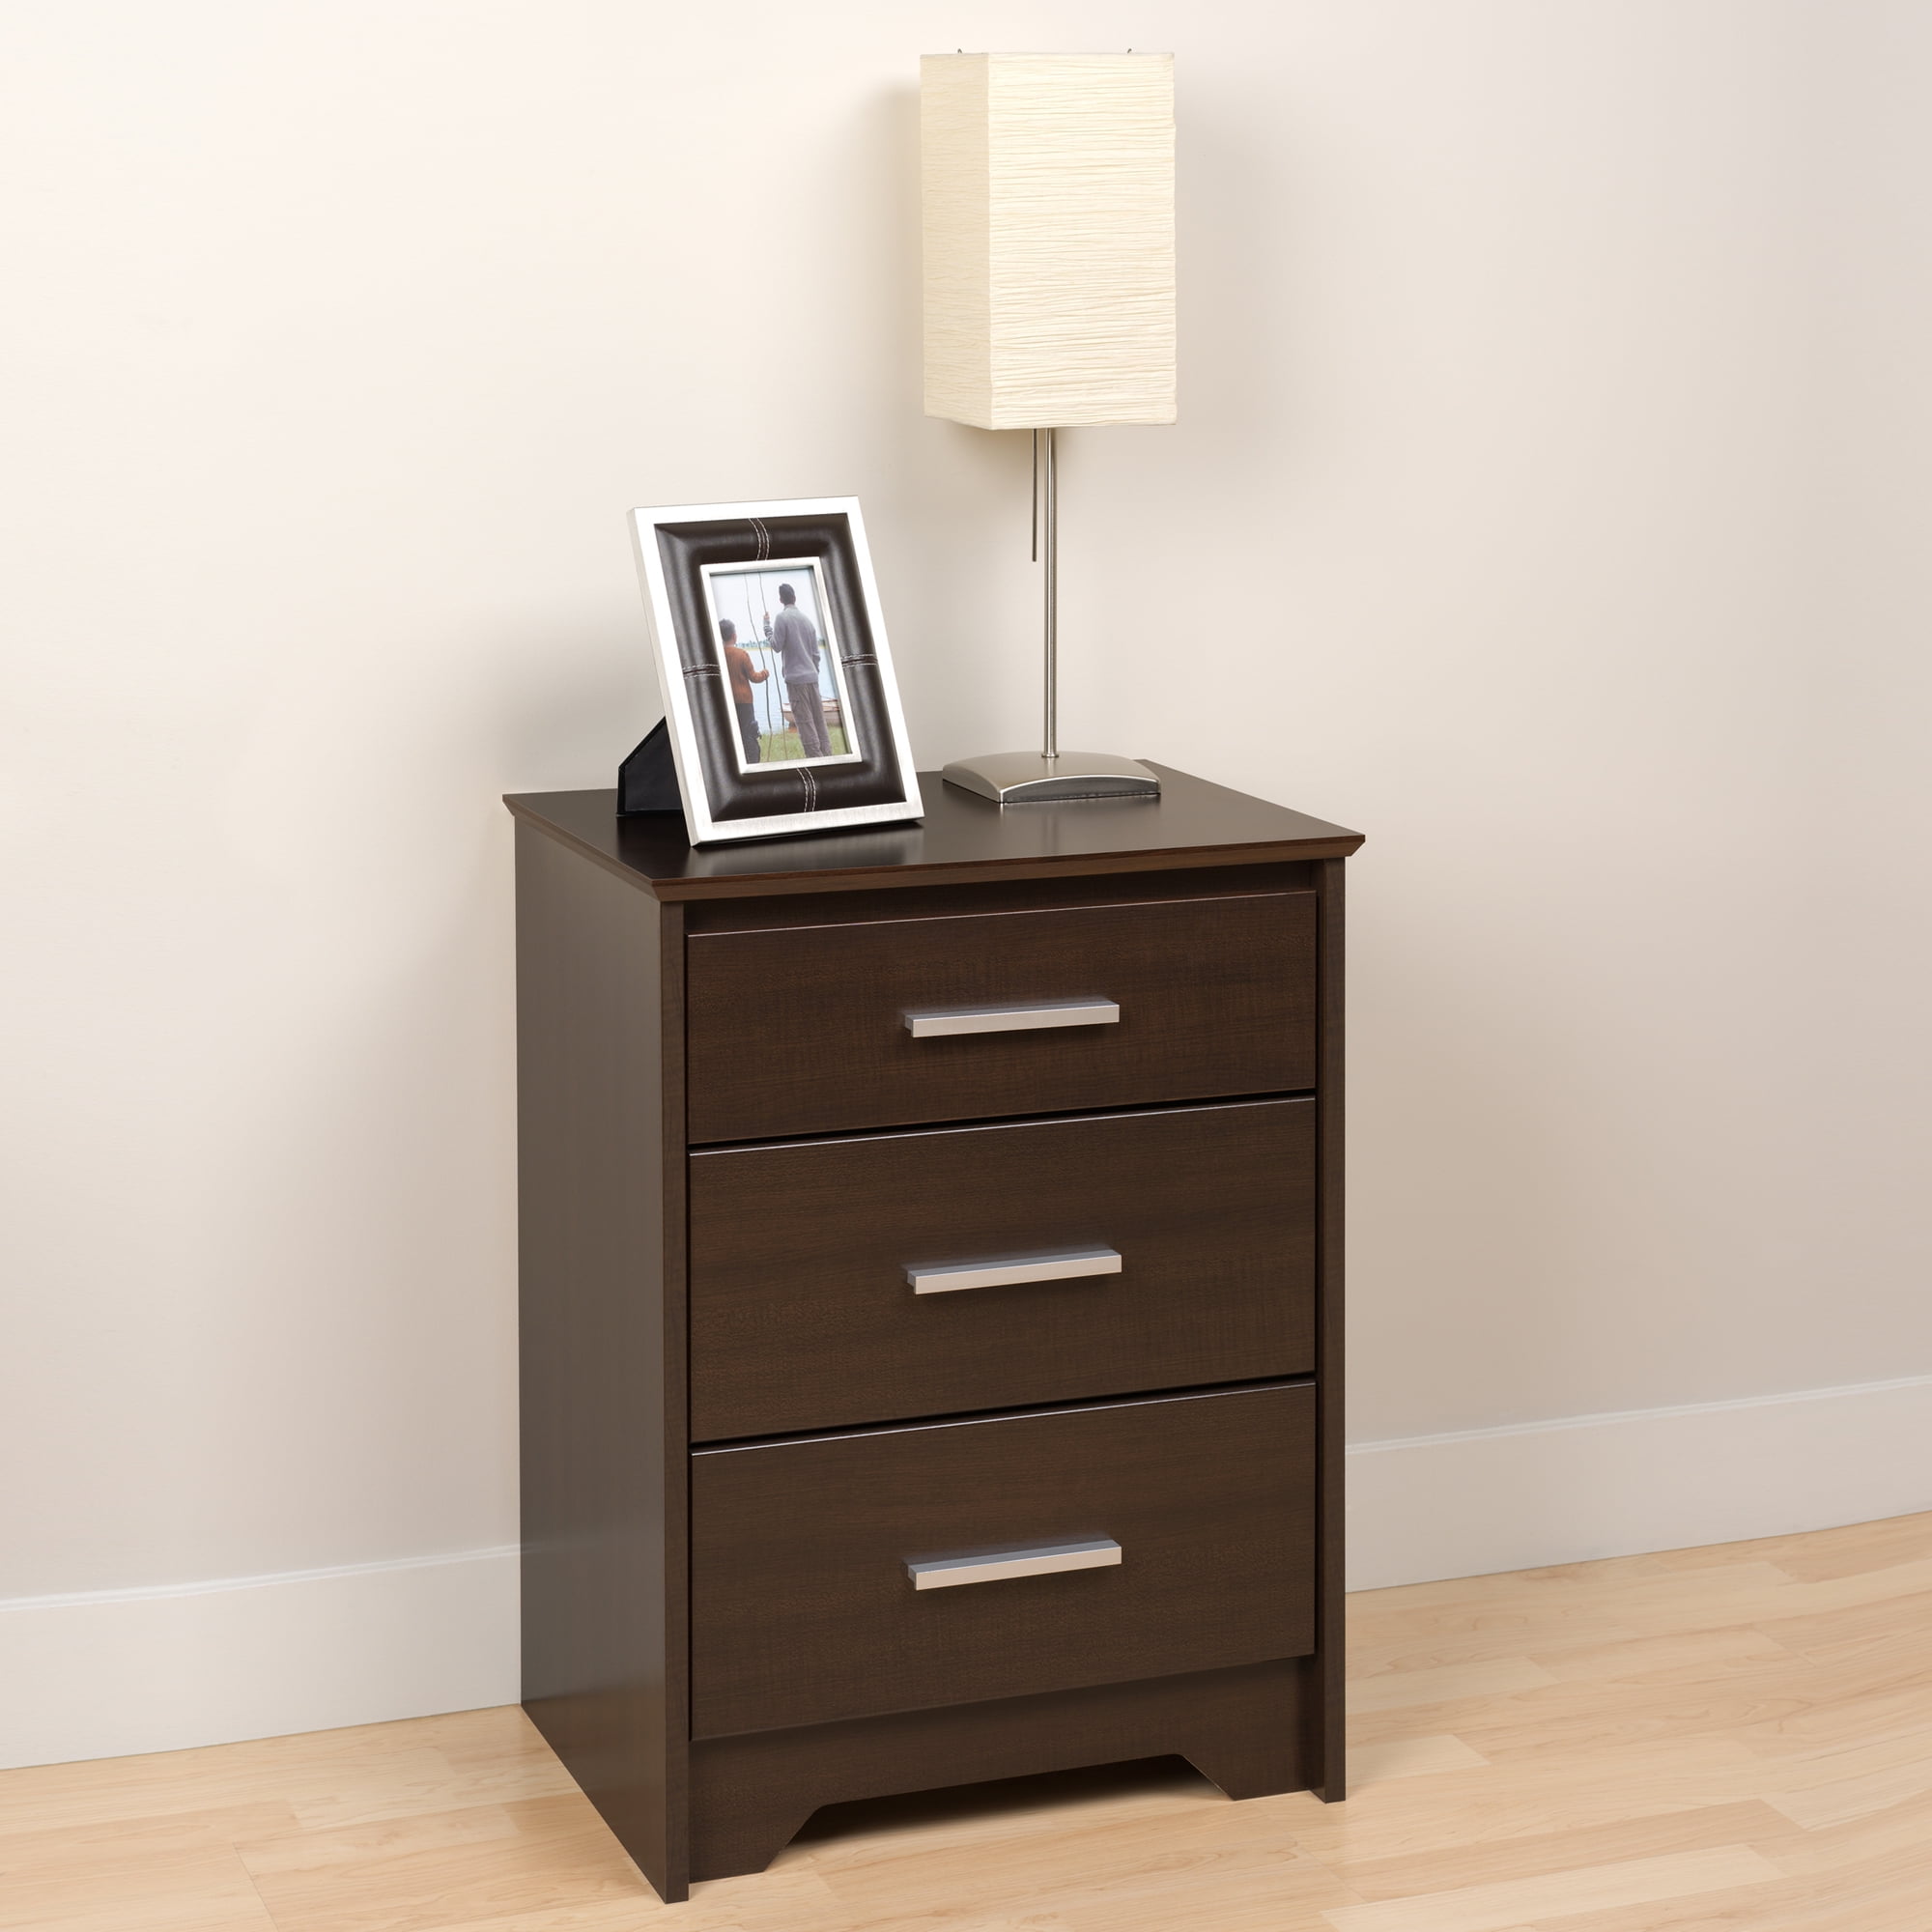 Sauder 409942 Shoal Creek Collection Jamocha Wood Night Stand for sale online 